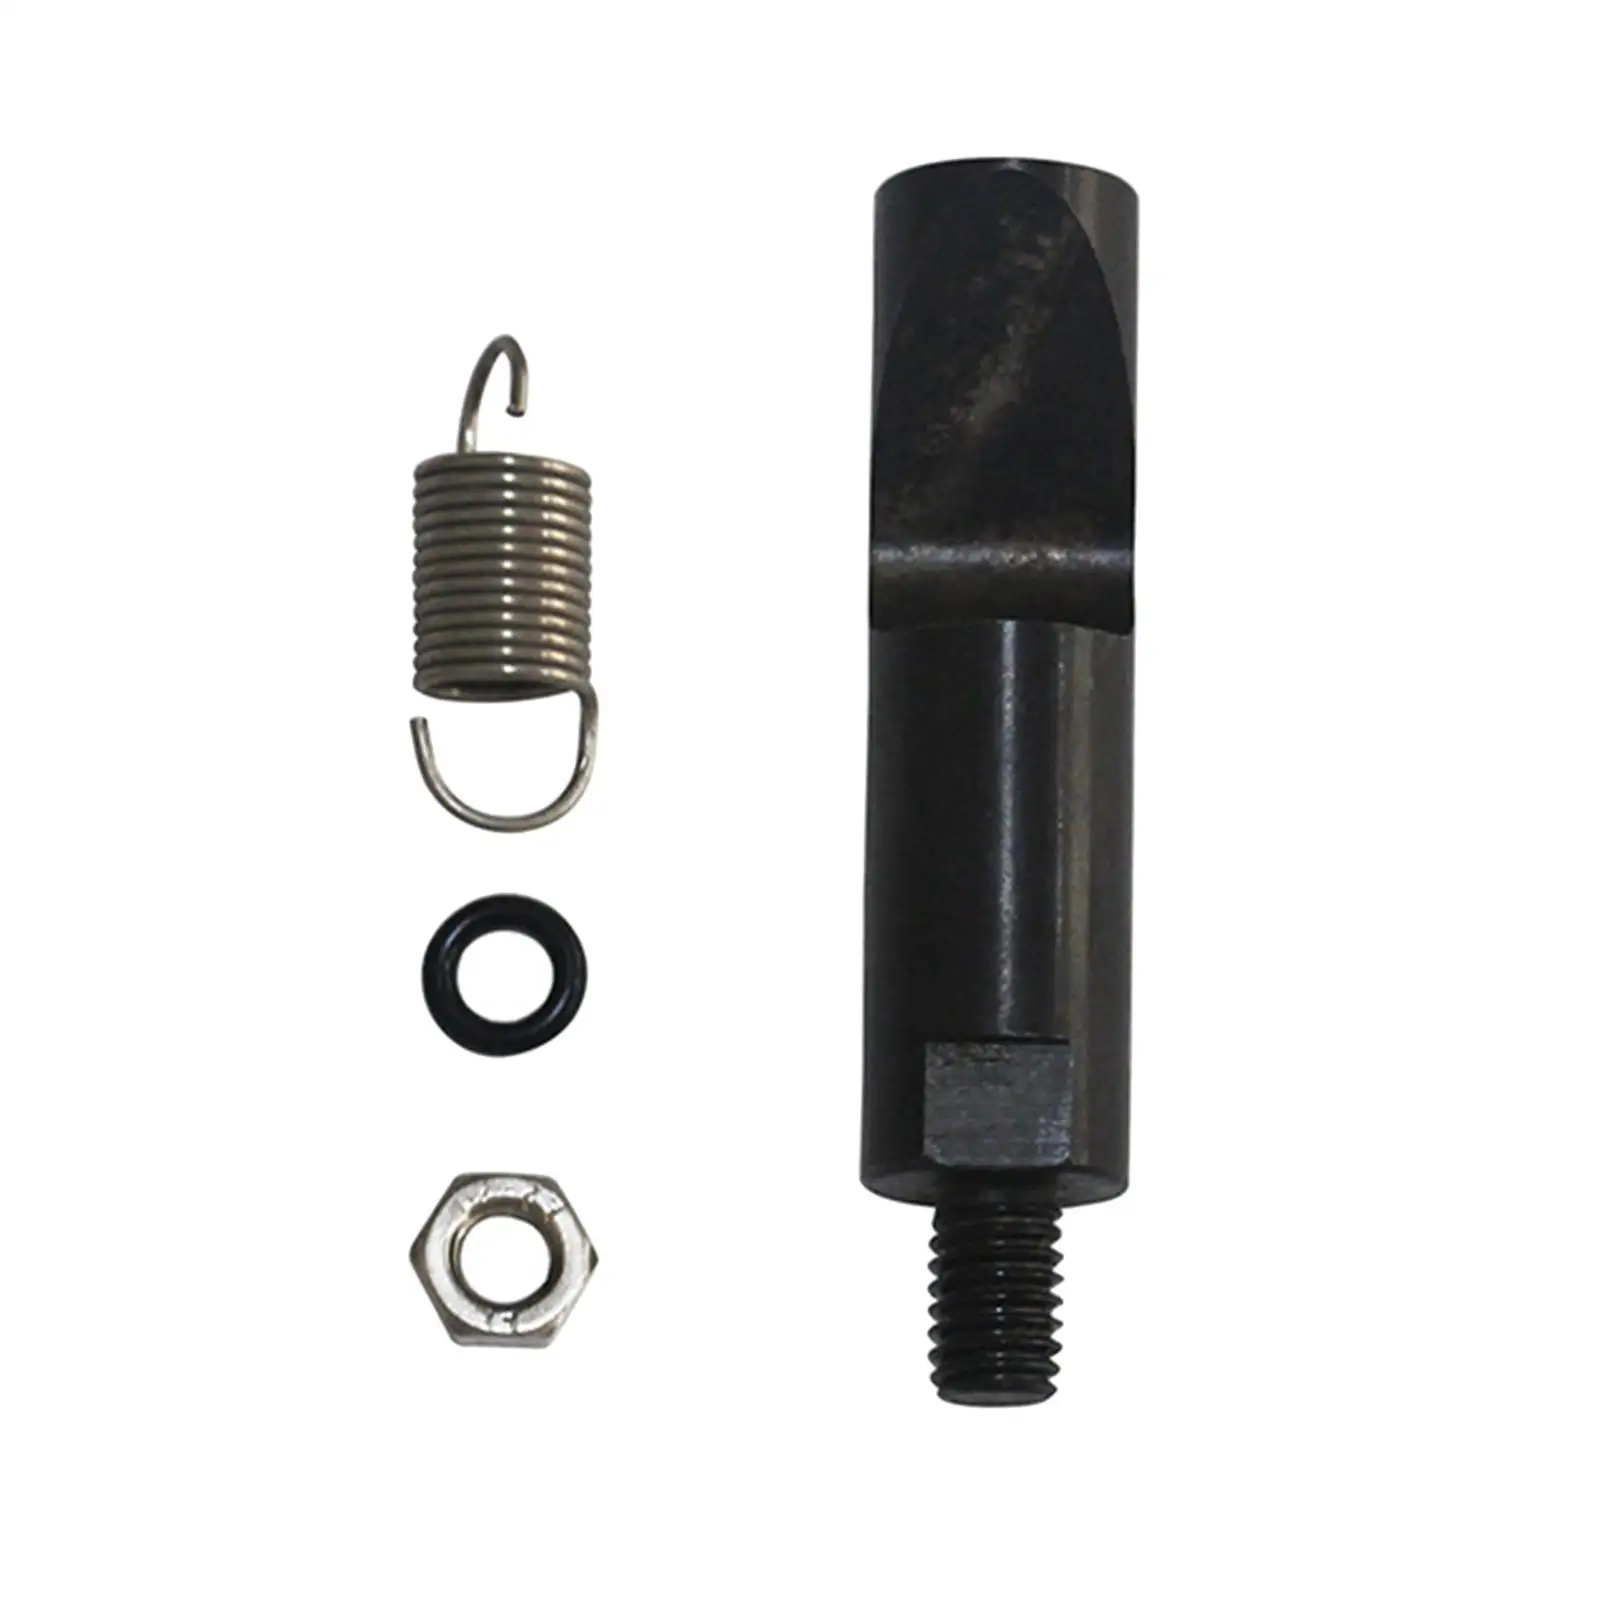 Fuel Pin Kit Durable Ve Pump Fuel Pin for Dodge Cummins 1988 to 1993